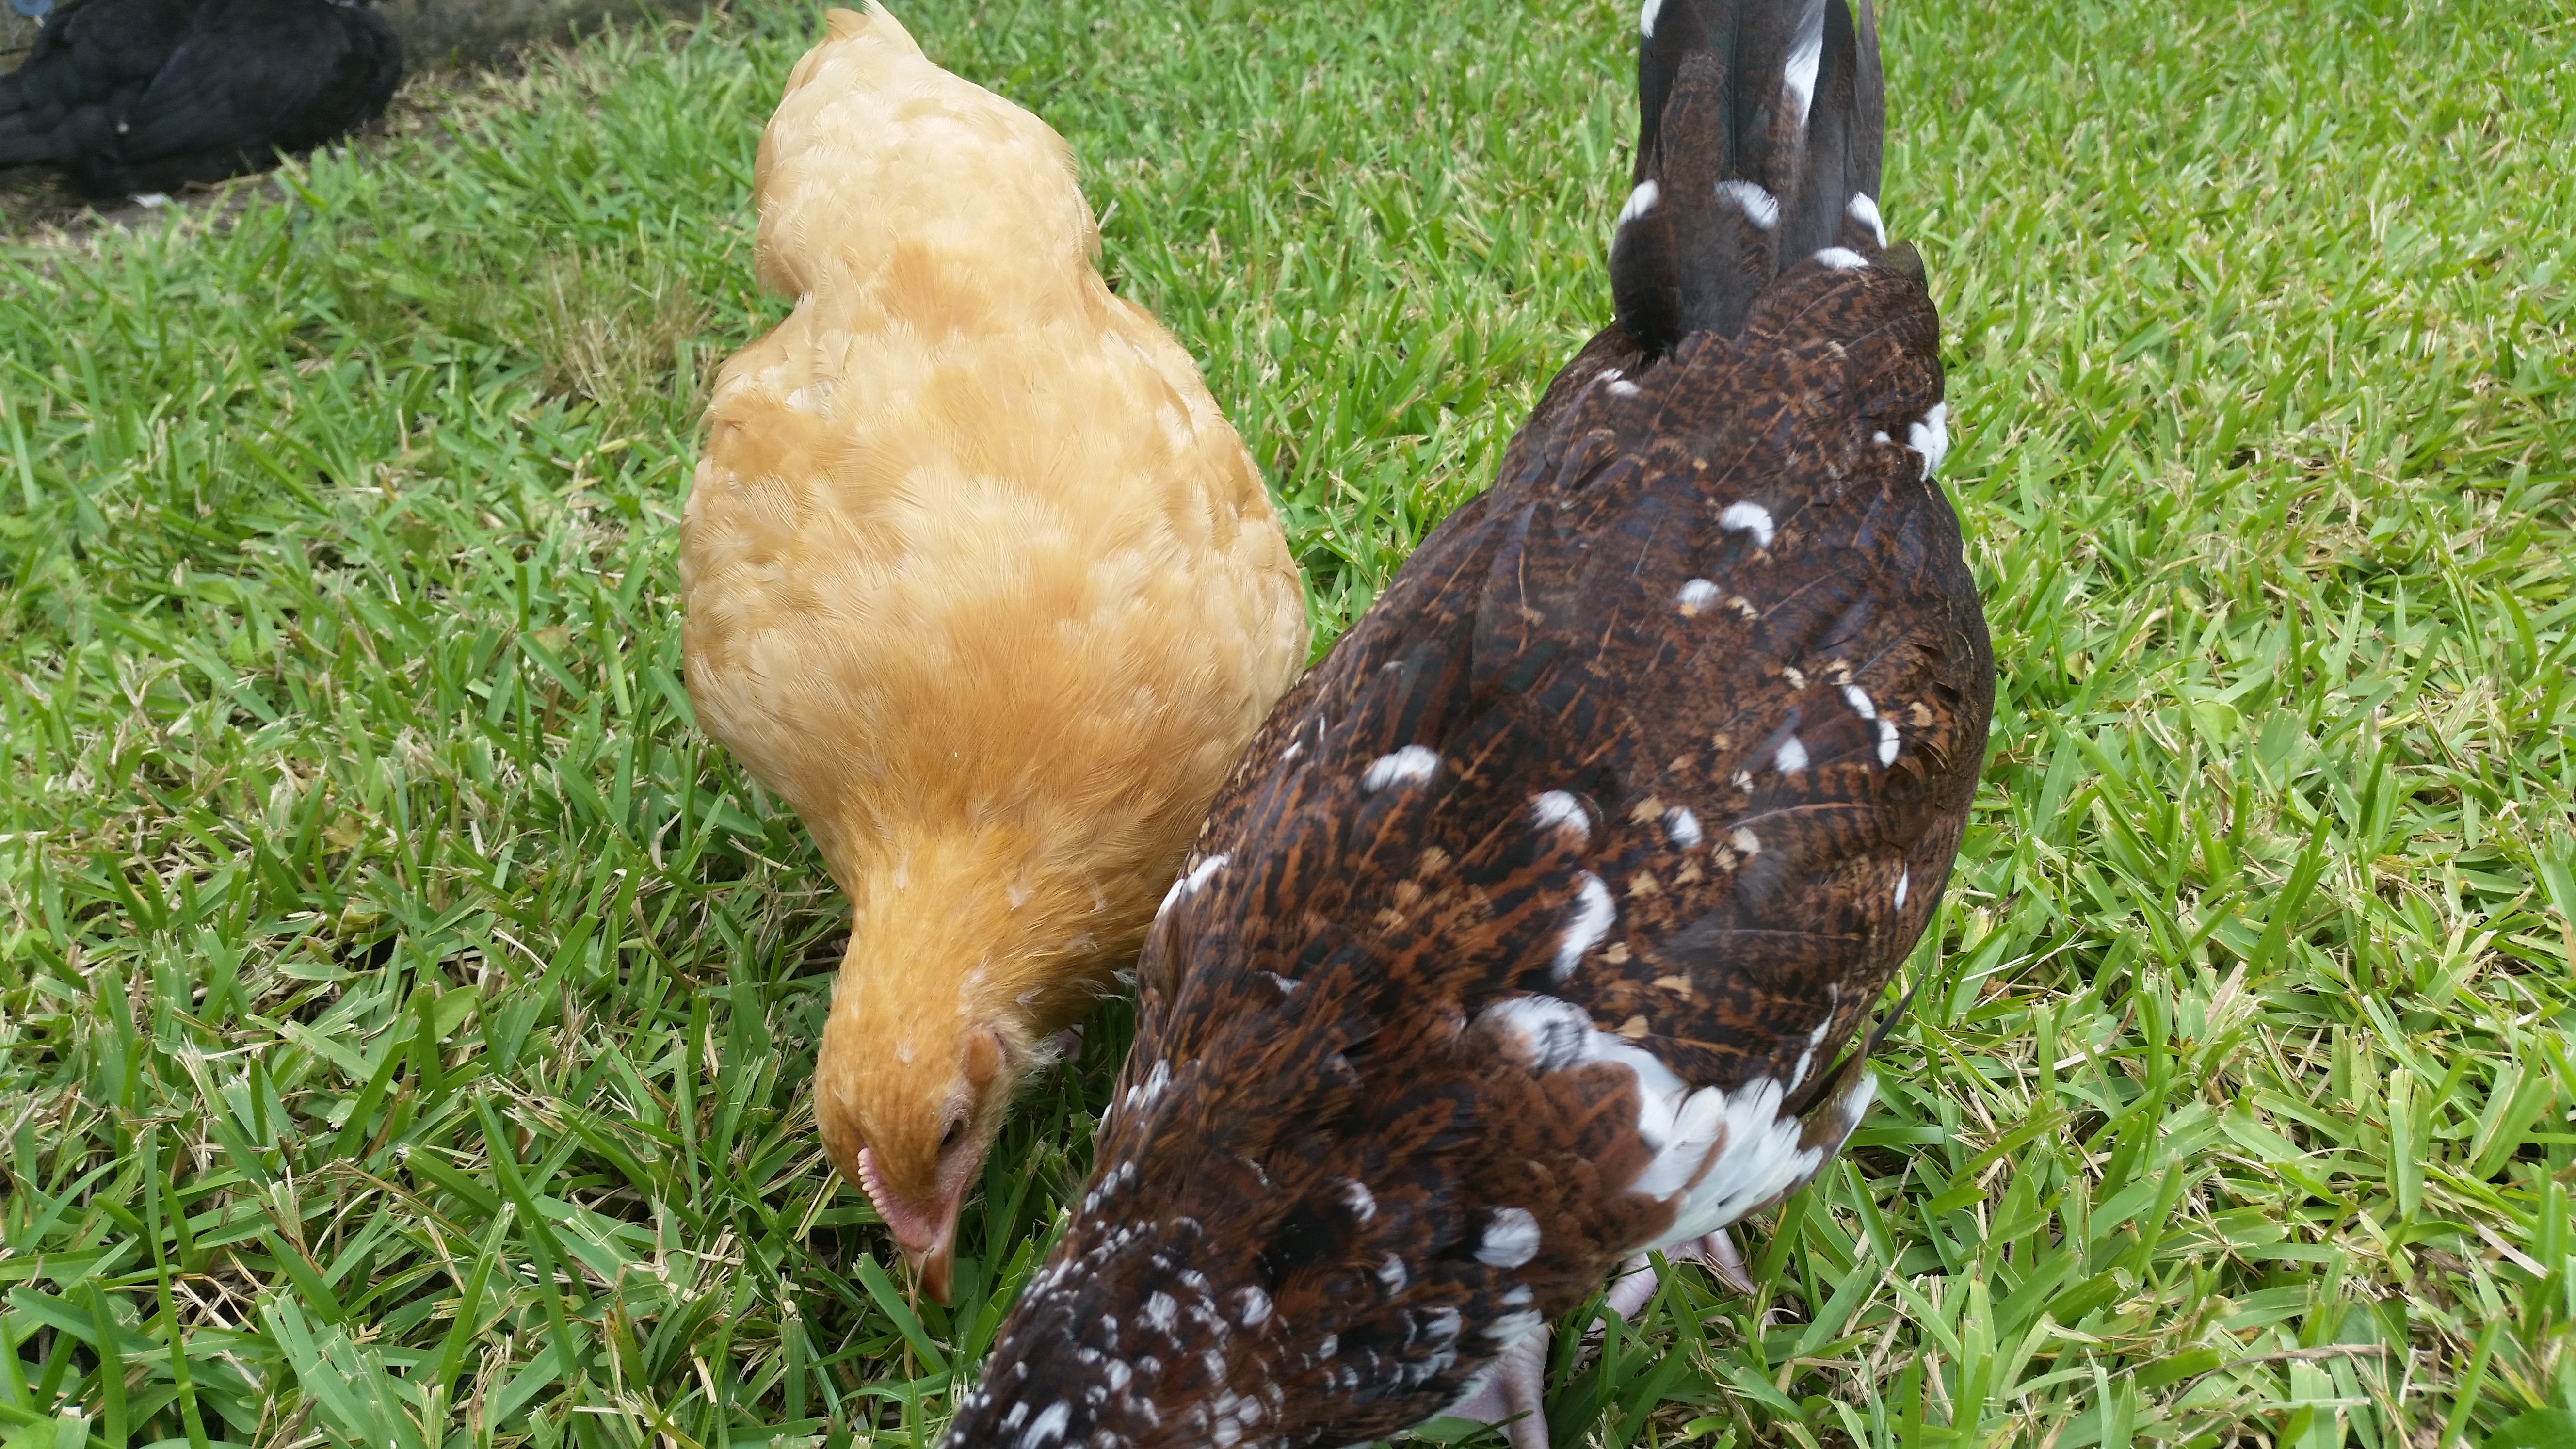 Buff Orpington and Speckled Sussex 11 weeks